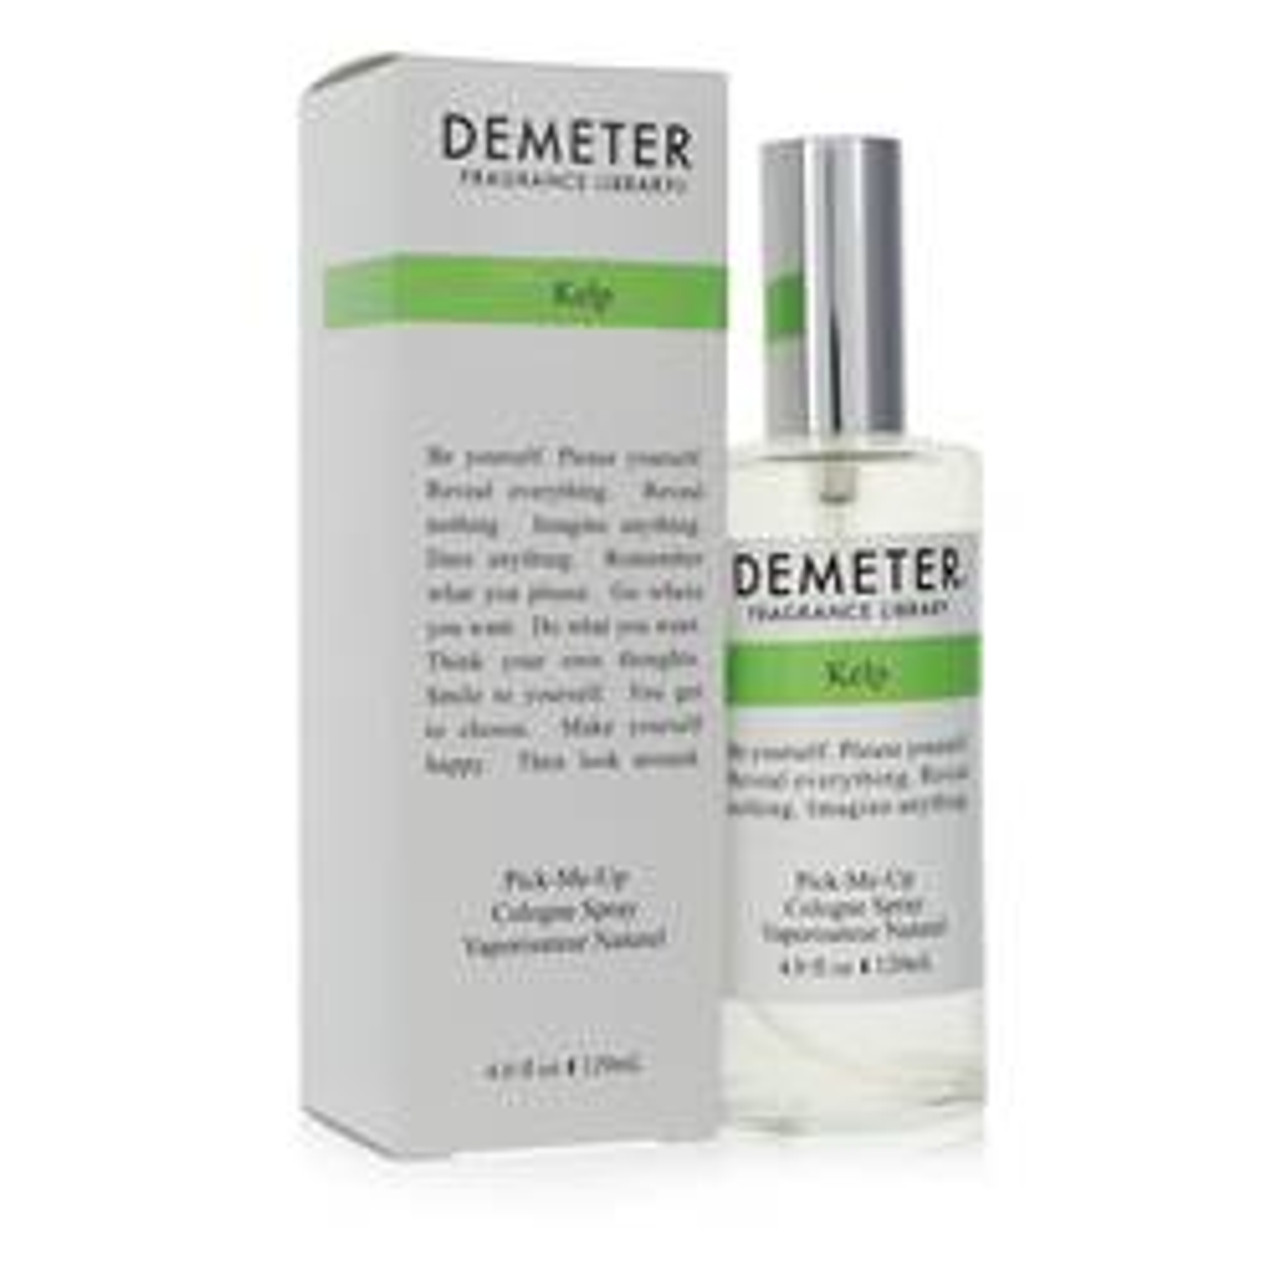 Demeter Kelp Cologne By Demeter Cologne Spray (Unisex) 4 oz for Men - [From 79.50 - Choose pk Qty ] - *Ships from Miami